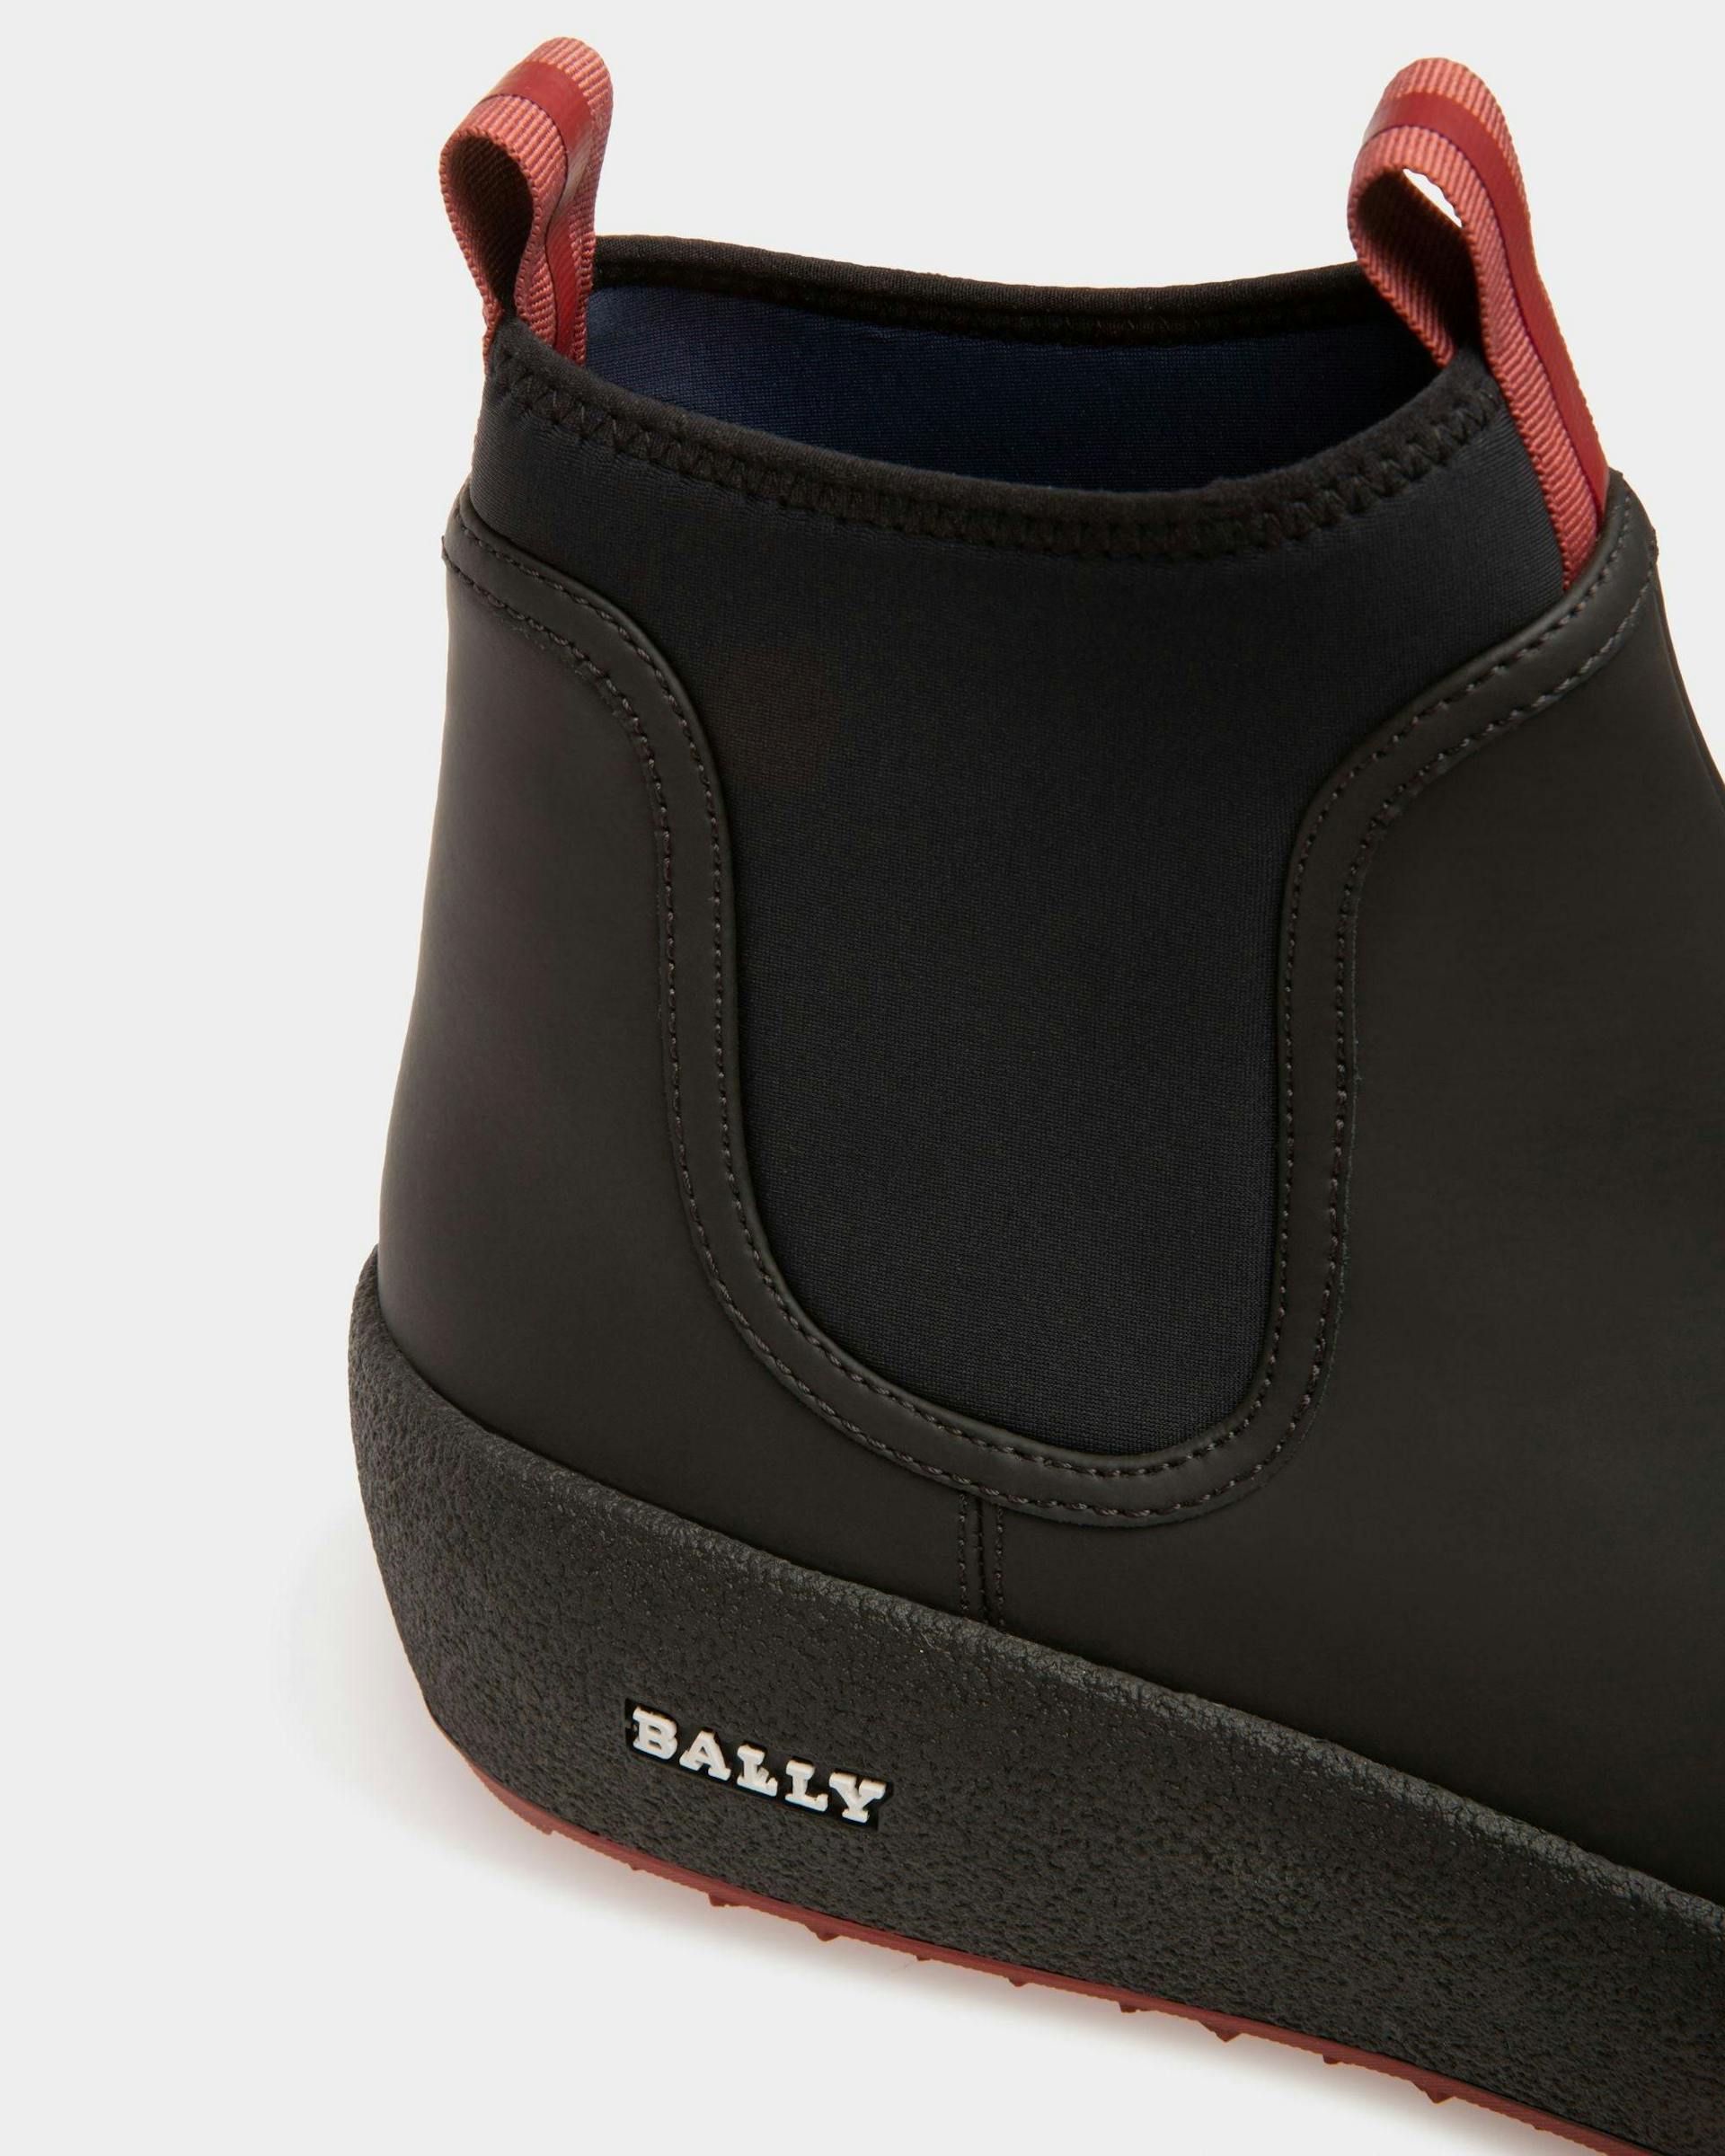 Bally Curling Booties In Black Leather - Men's - Bally - 06